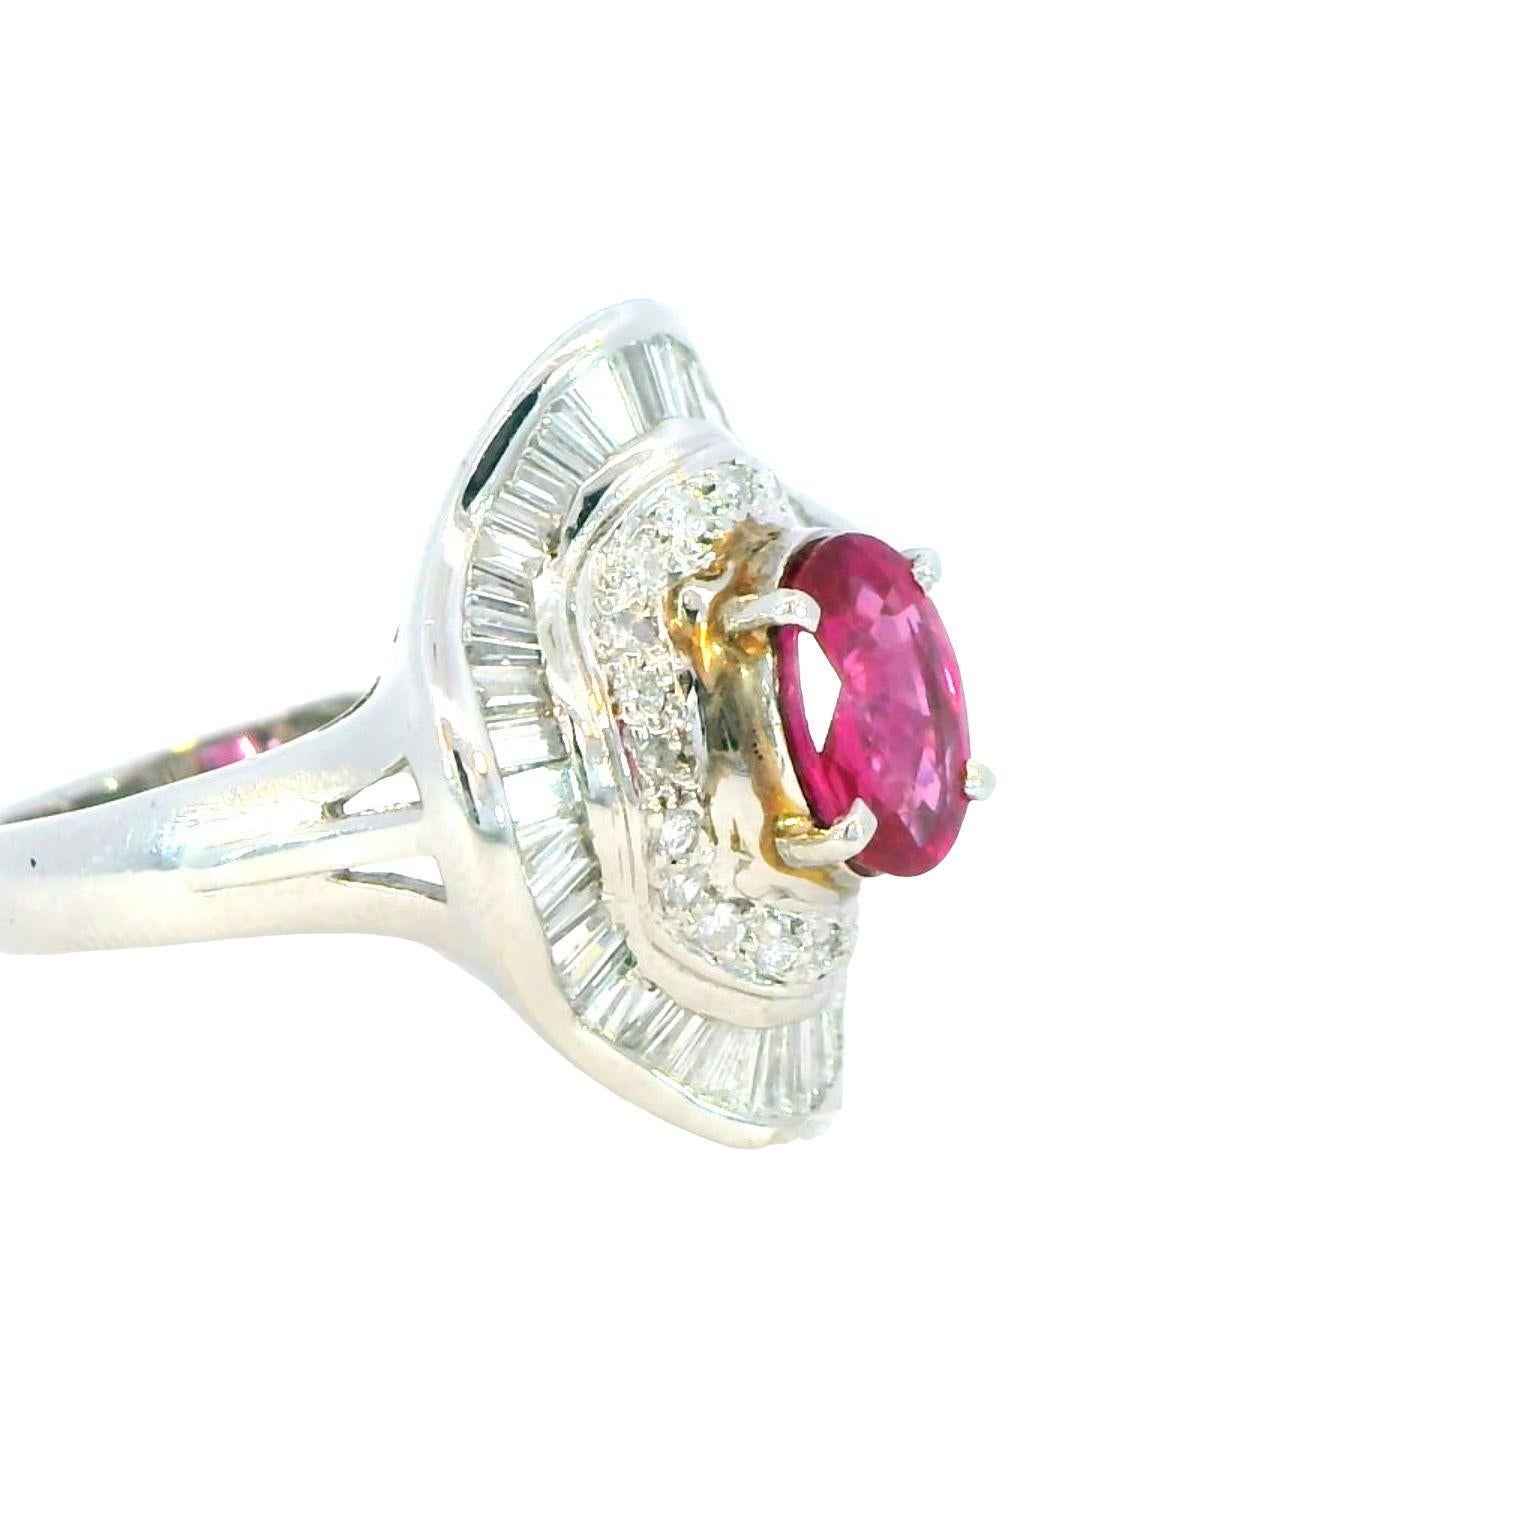 Elevate your elegance with our 1.20 Carat Ruby and Diamond Ring, a dazzling masterpiece that showcases:

- A radiant 1.20-carat ruby, capturing the essence of passion and allure.
- Brilliant diamonds totaling 1.00 carats, adding a touch of timeless